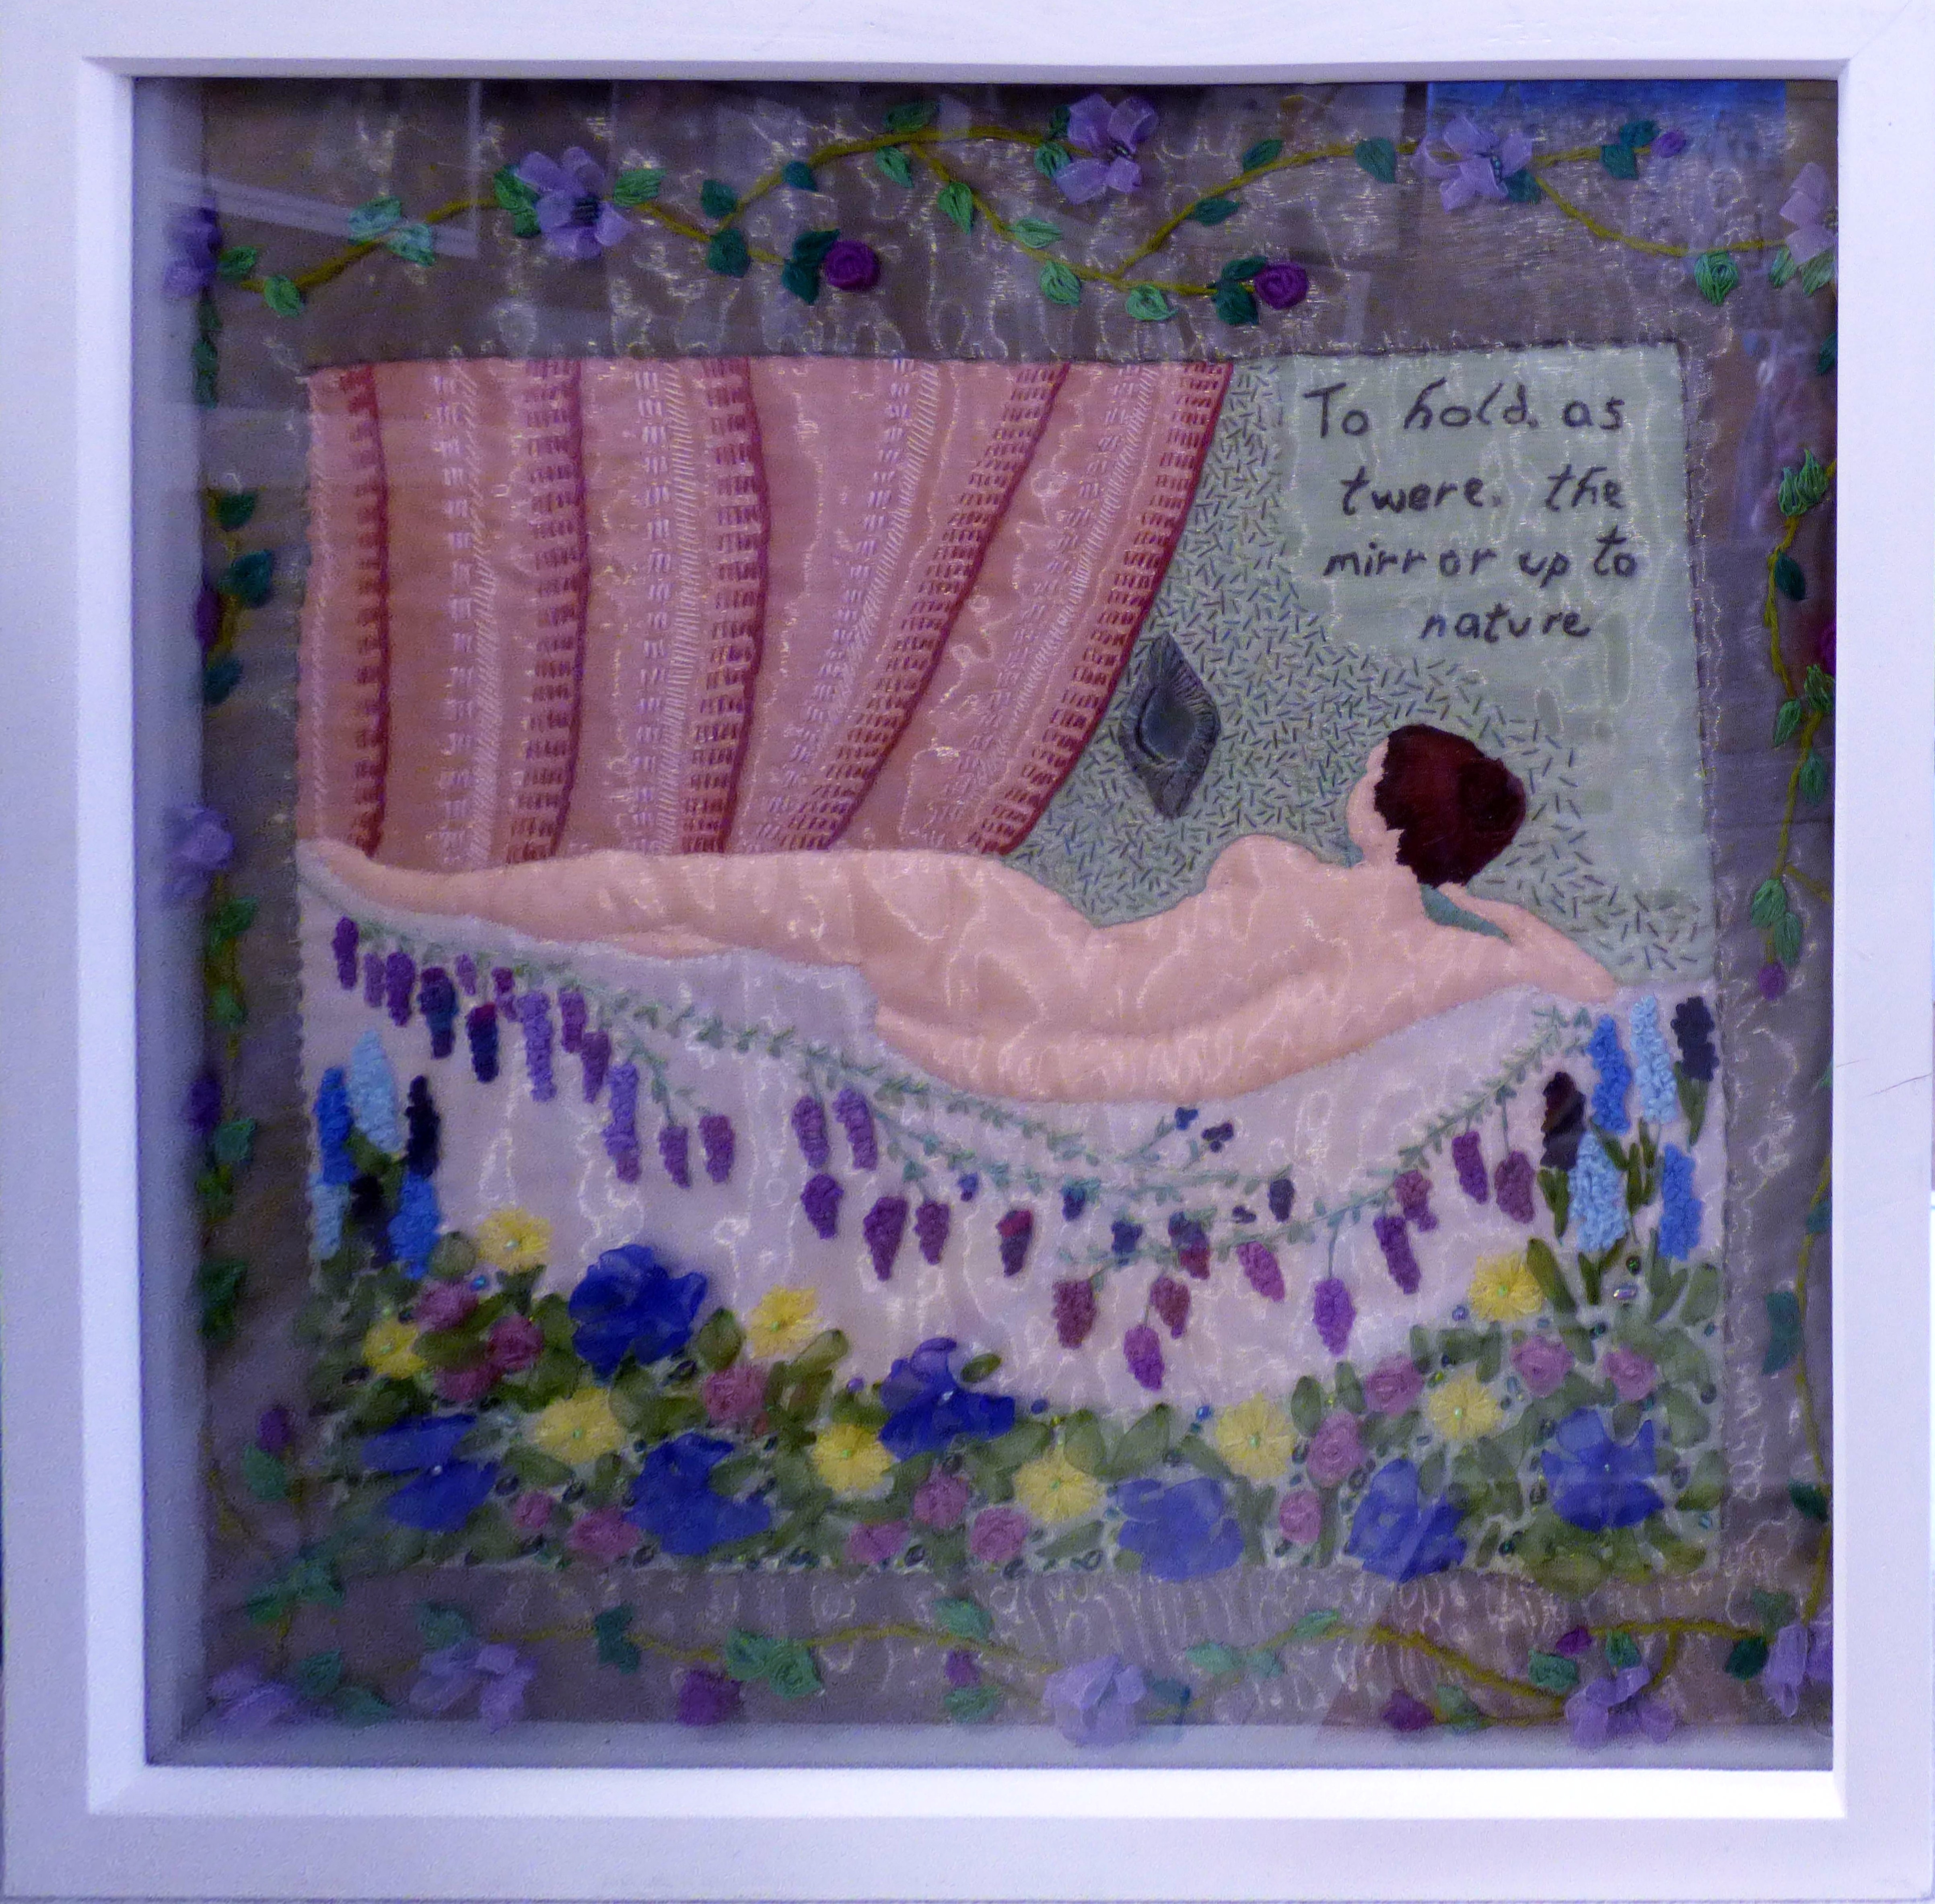 Gill Roberts won 3rd Prize in the "From Postcard to Stitch" competition, January 2022